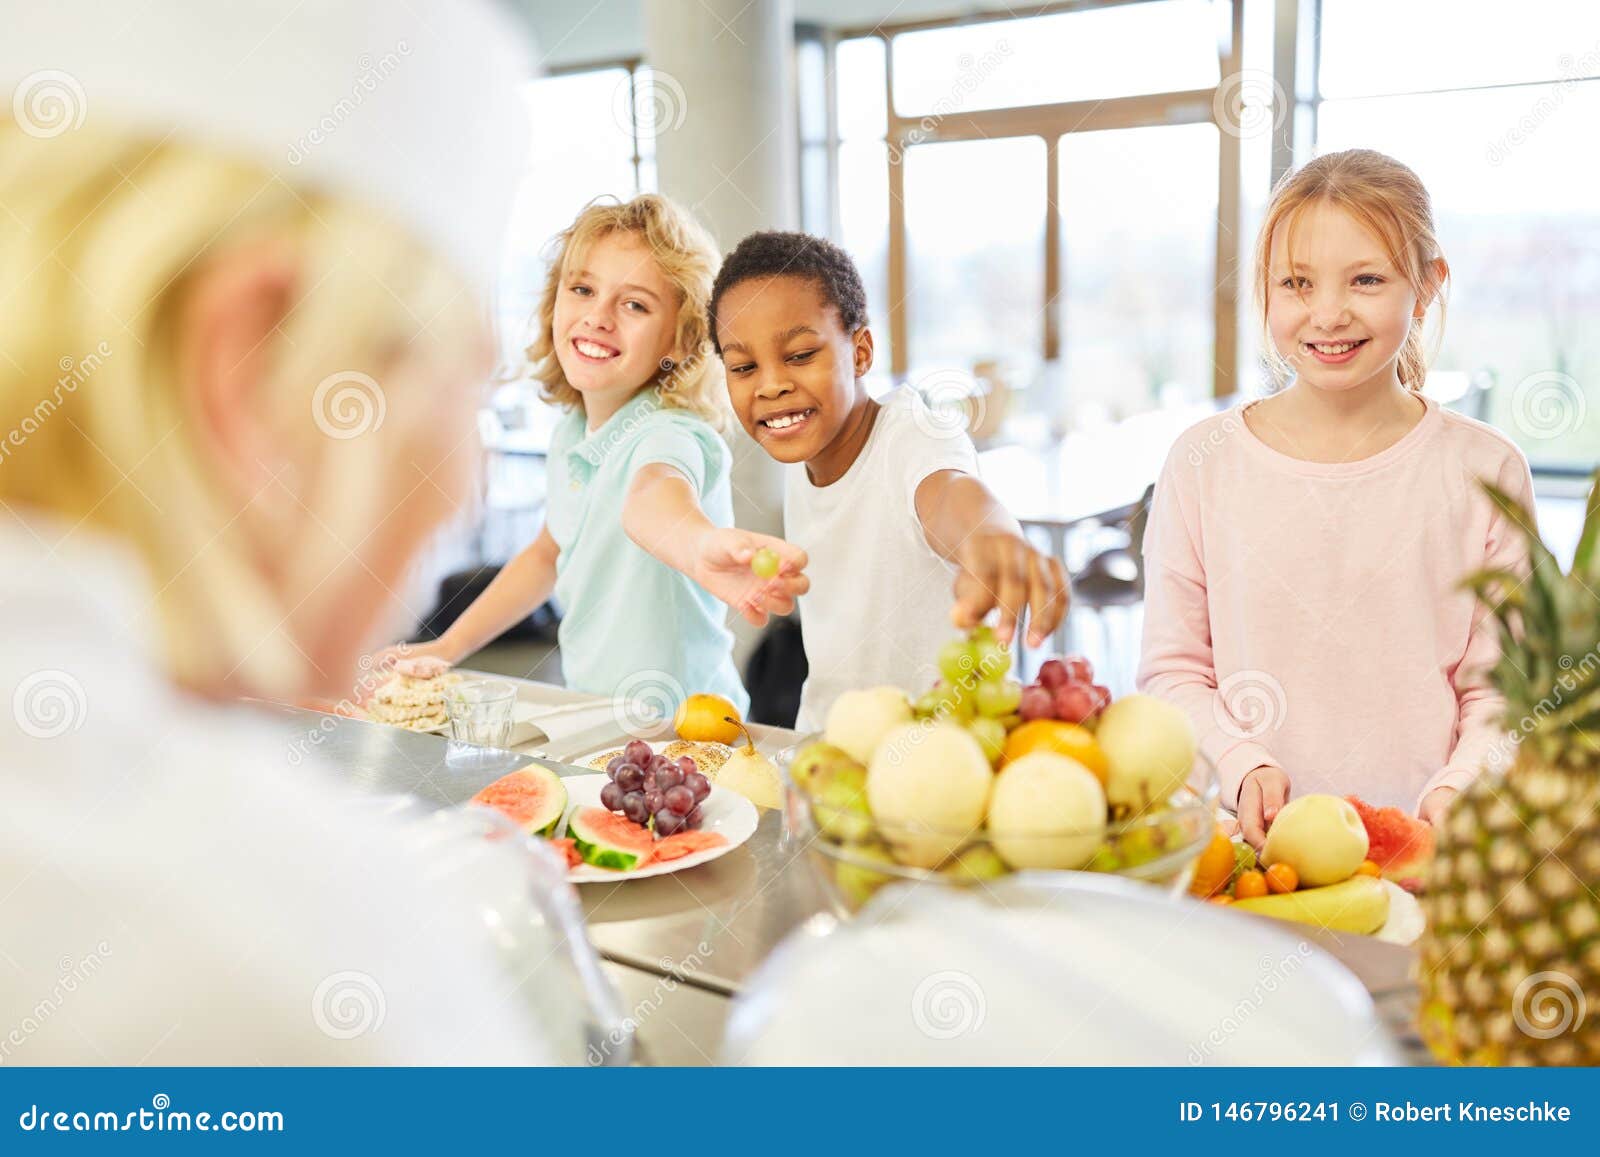 Children Eat Together in the Canteen Stock Photo - Image of friendship,  canteen: 146796260